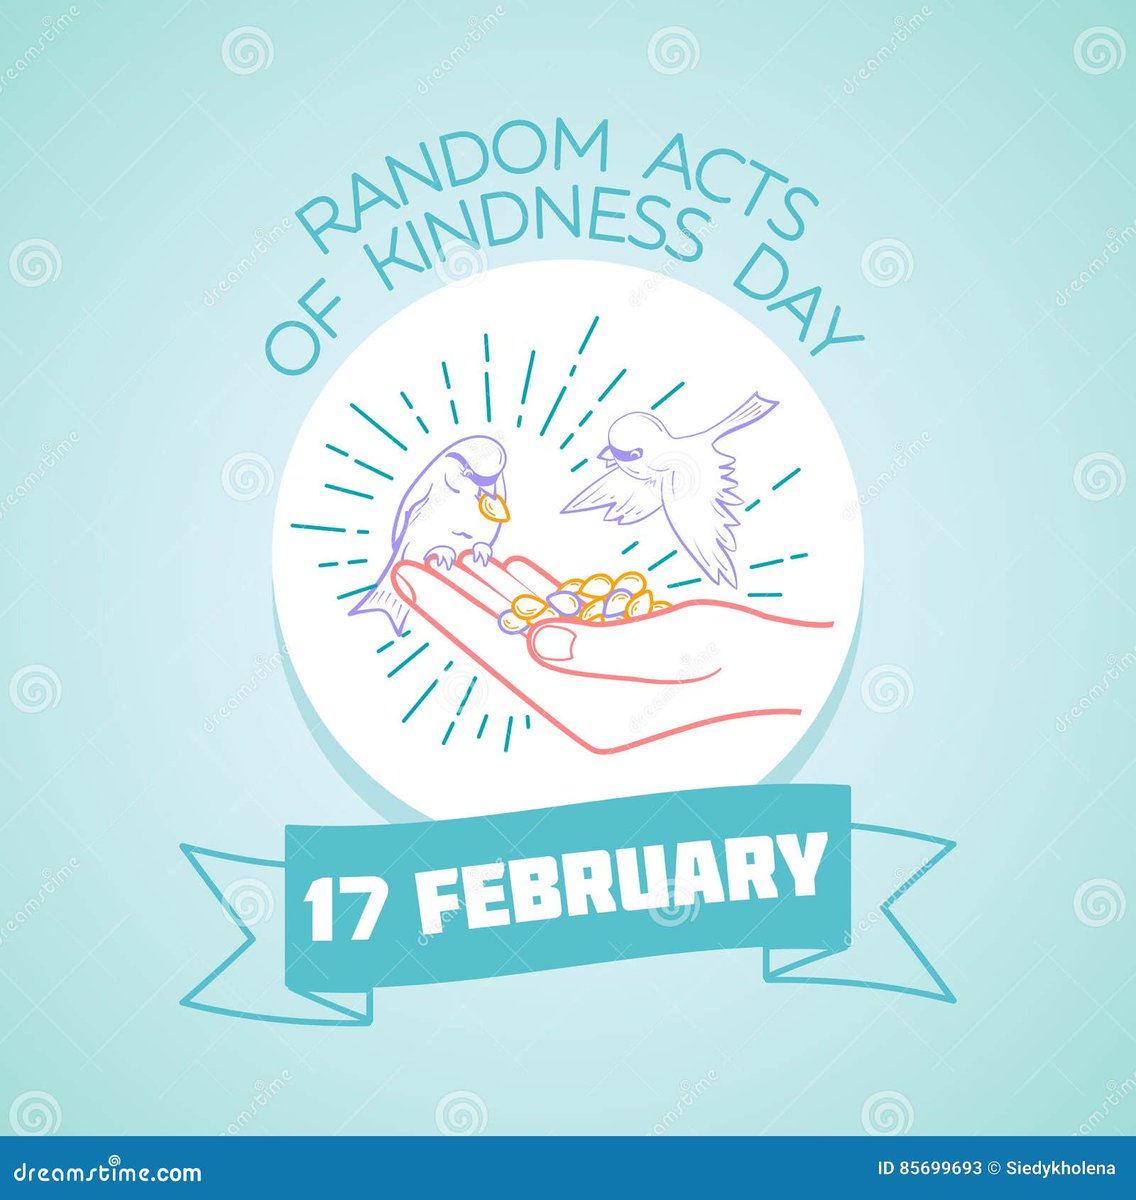 ✨ Happy Random Acts of Kindness Day! 

 Today is a day we hold dear here at the Canadian Legal Resource Centre – a day to spread some extra cheer and make the world a little brighter with random acts of kindness. 🌍❤️
#CanadianLegalResourceCentre  #KindnessEveryday